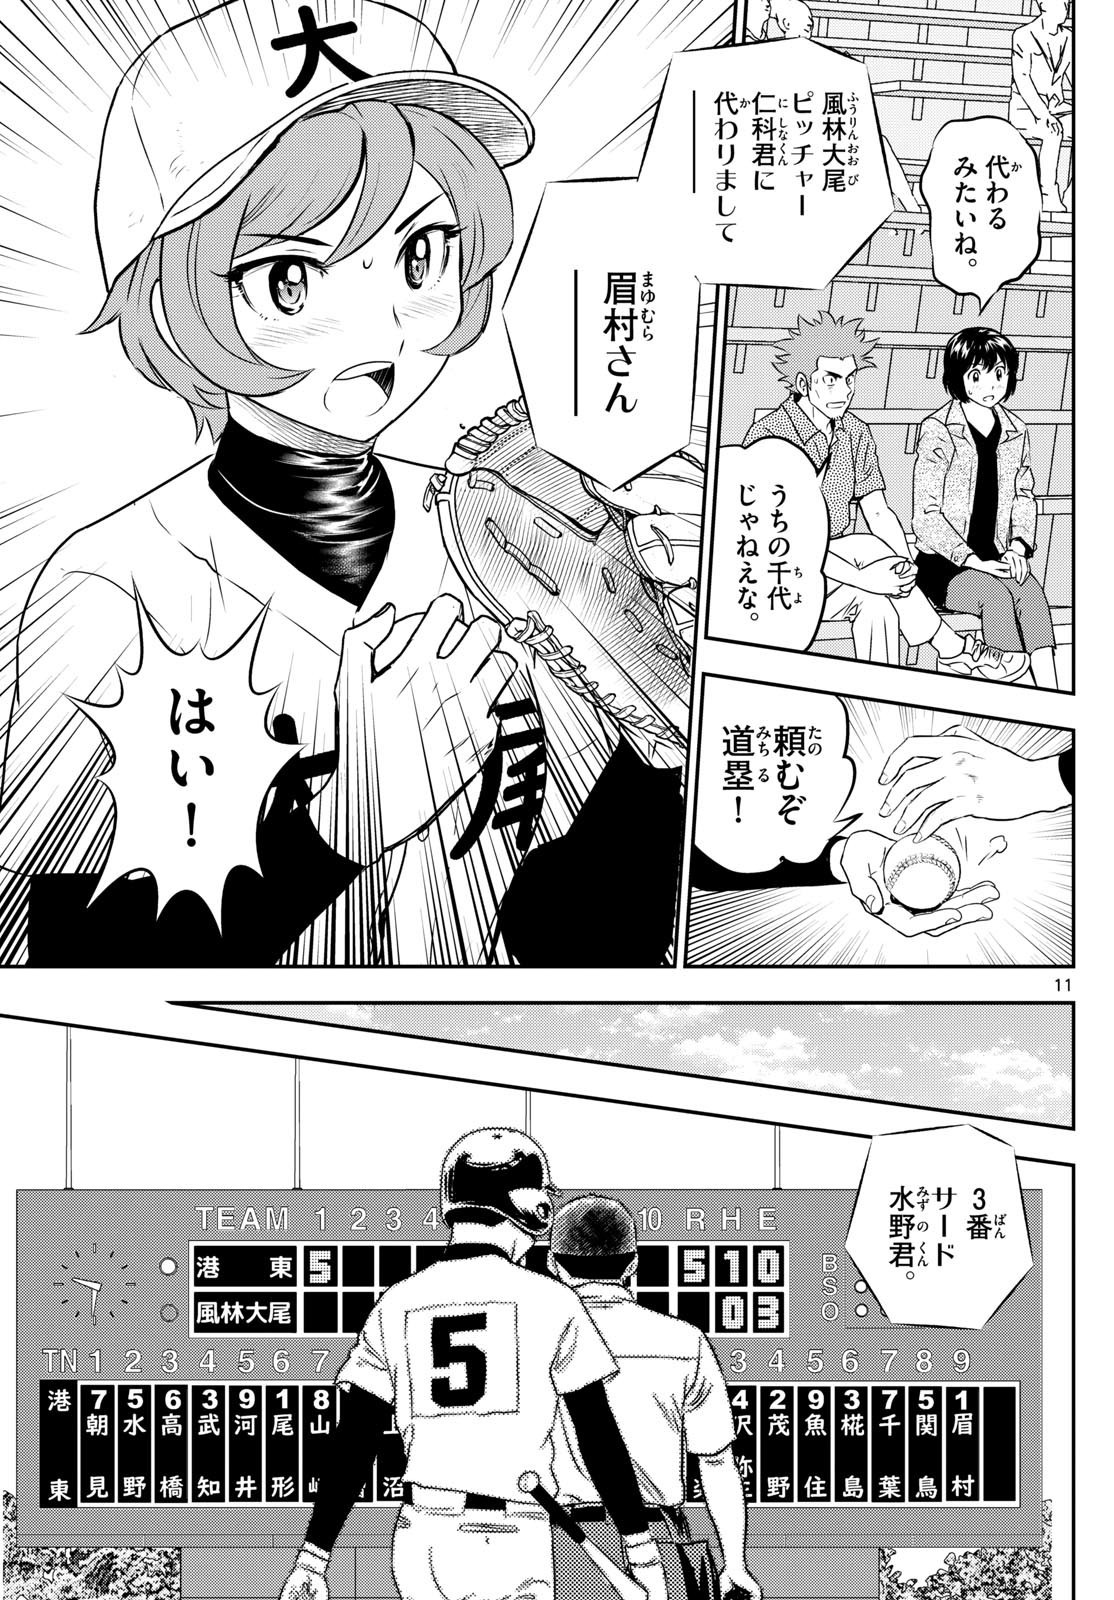 Major 2nd - メジャーセカンド - Chapter 284 - Page 11